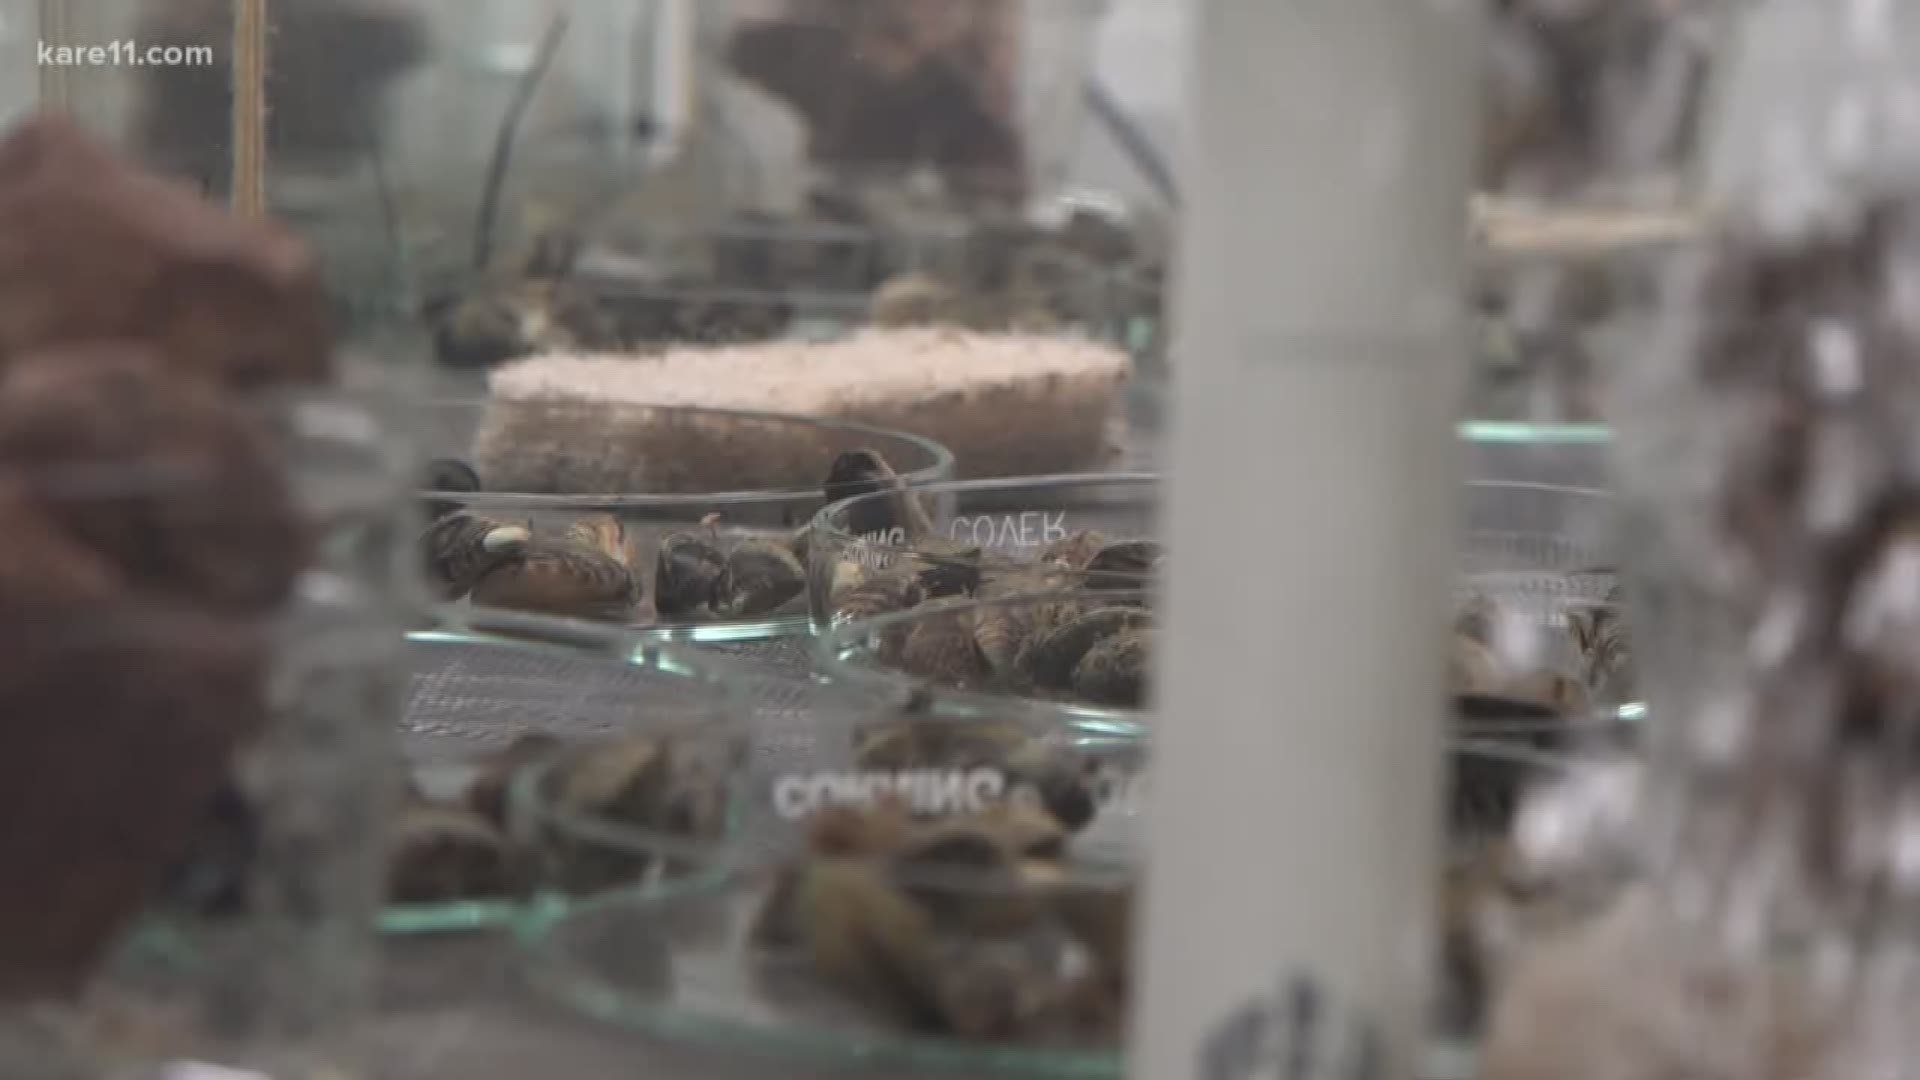 Researchers at the U of M are researching how to combat zebra mussels using a specific pathogen or type of bacteria. https://kare11.tv/2IbBHuP